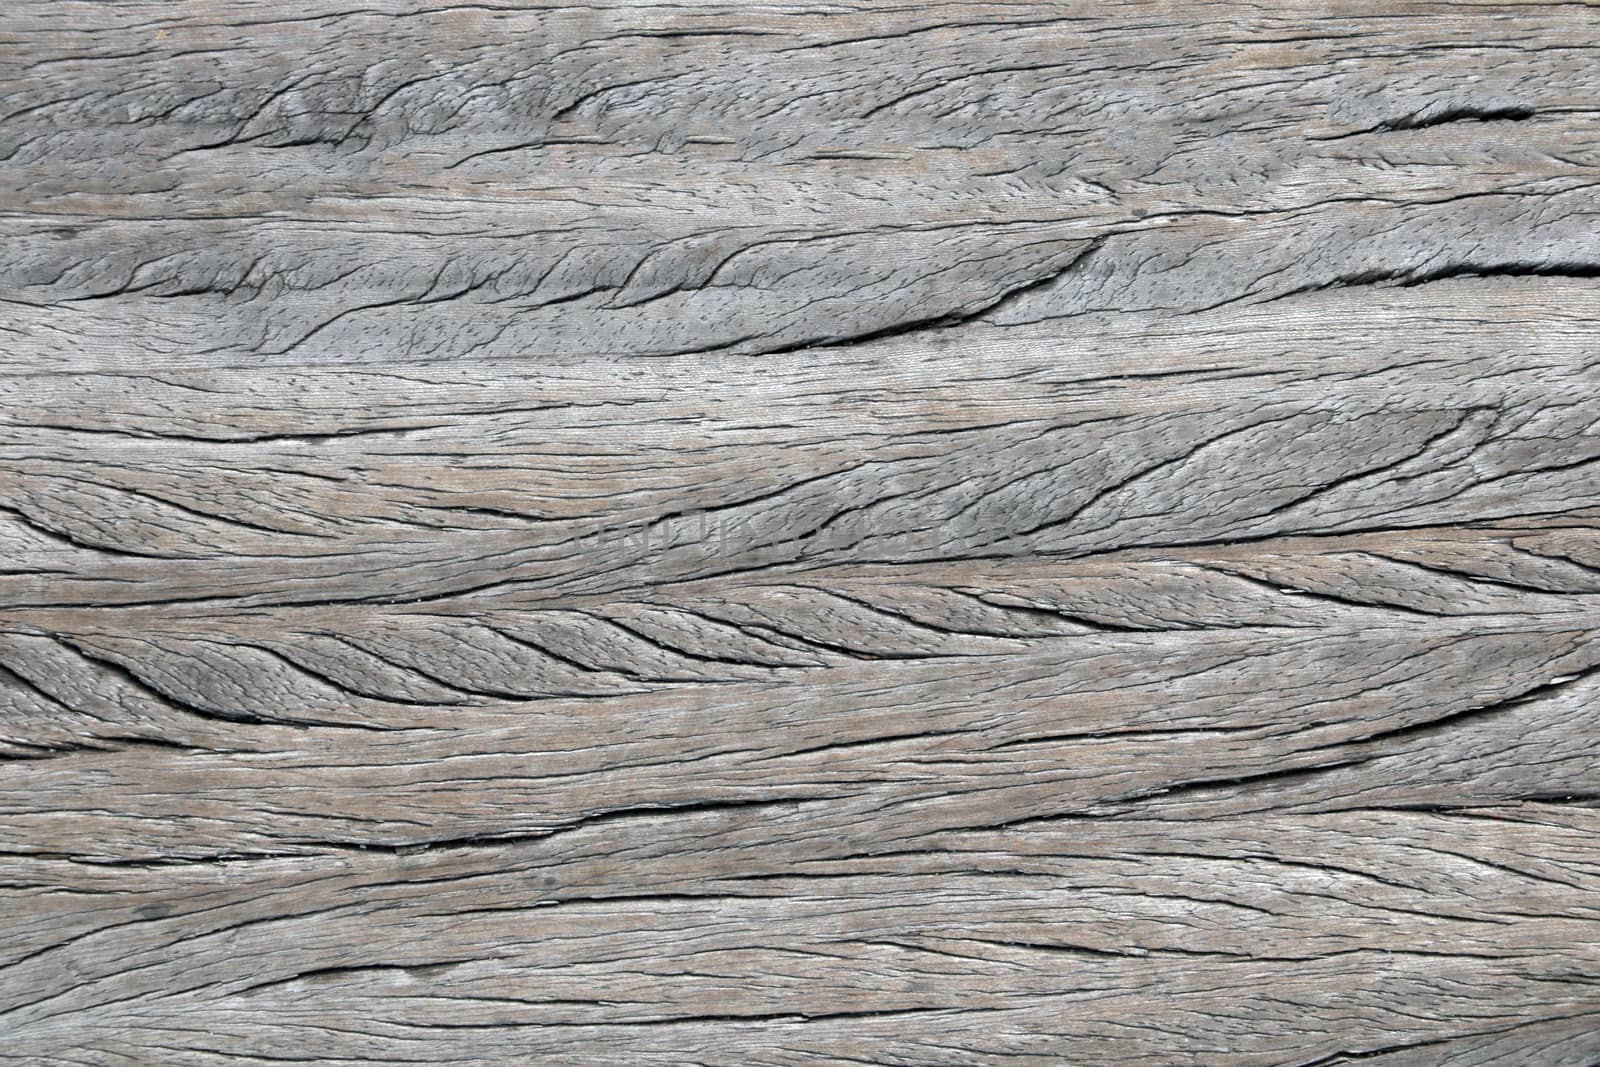 Wood texture with natural patterns, image can be used as a background for a design, top view